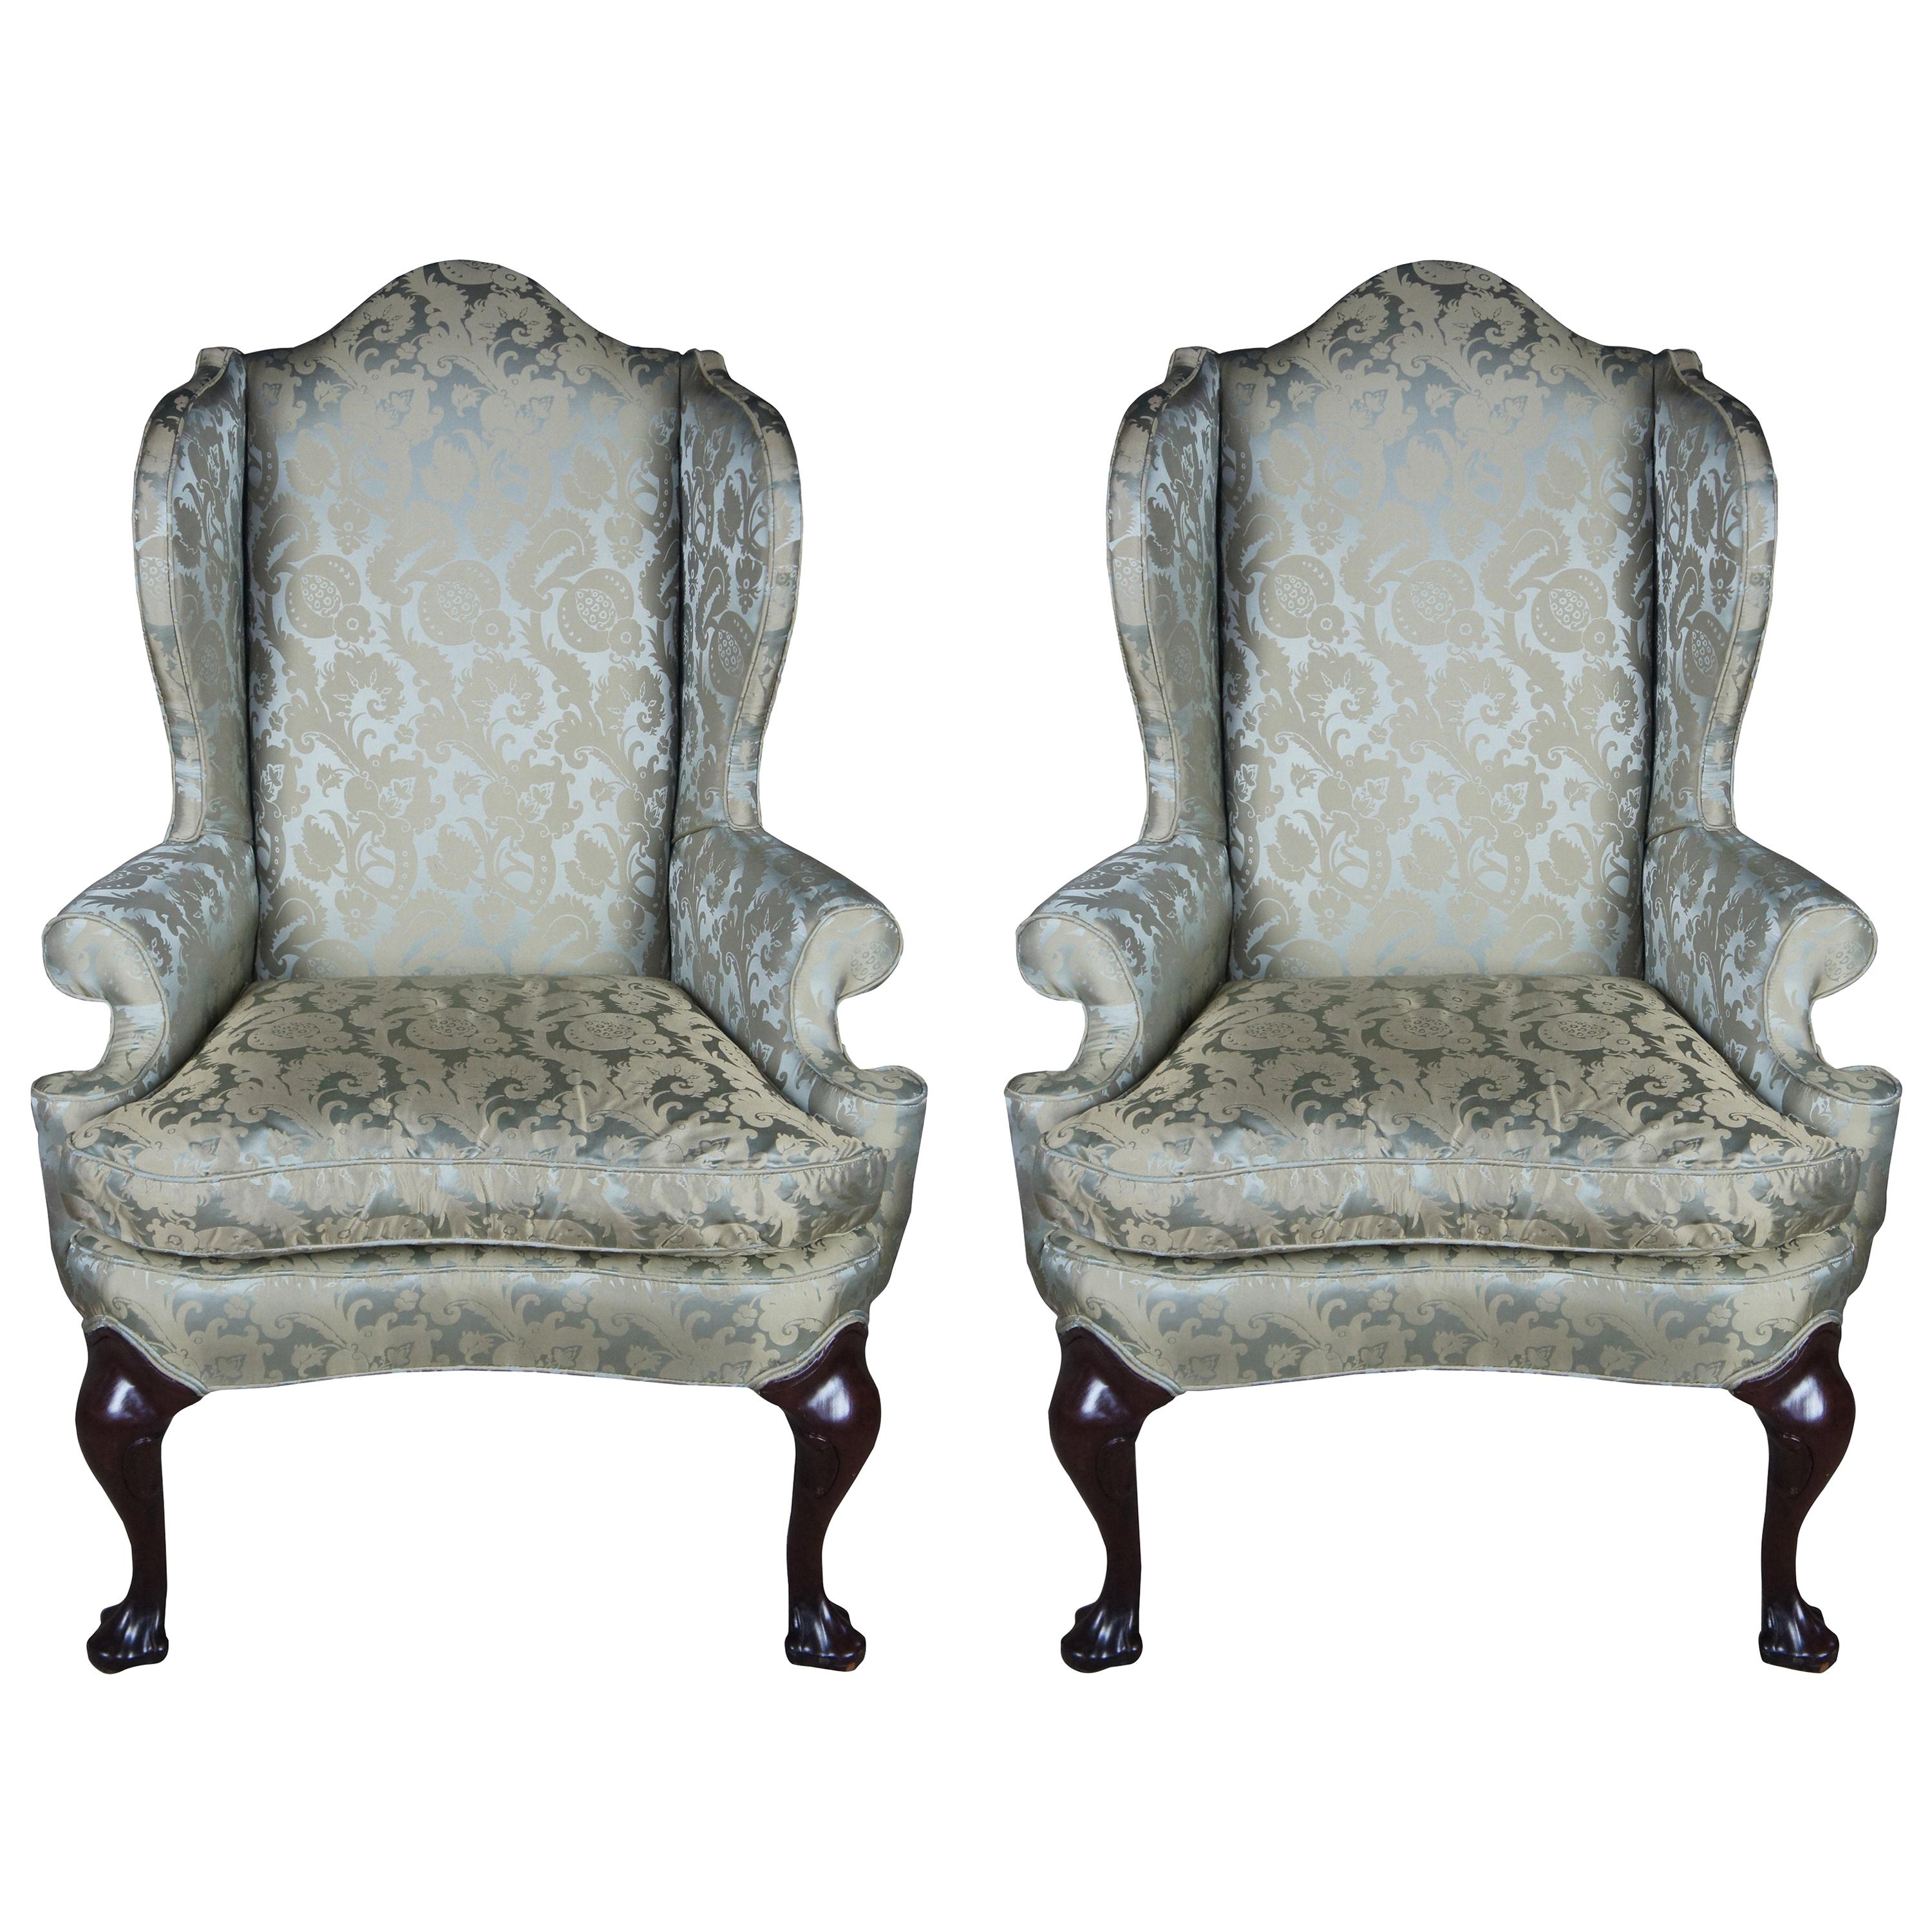 2 Antique Queen Anne Mahogany Wingback Arm Chairs Chippendale Damask Fabric